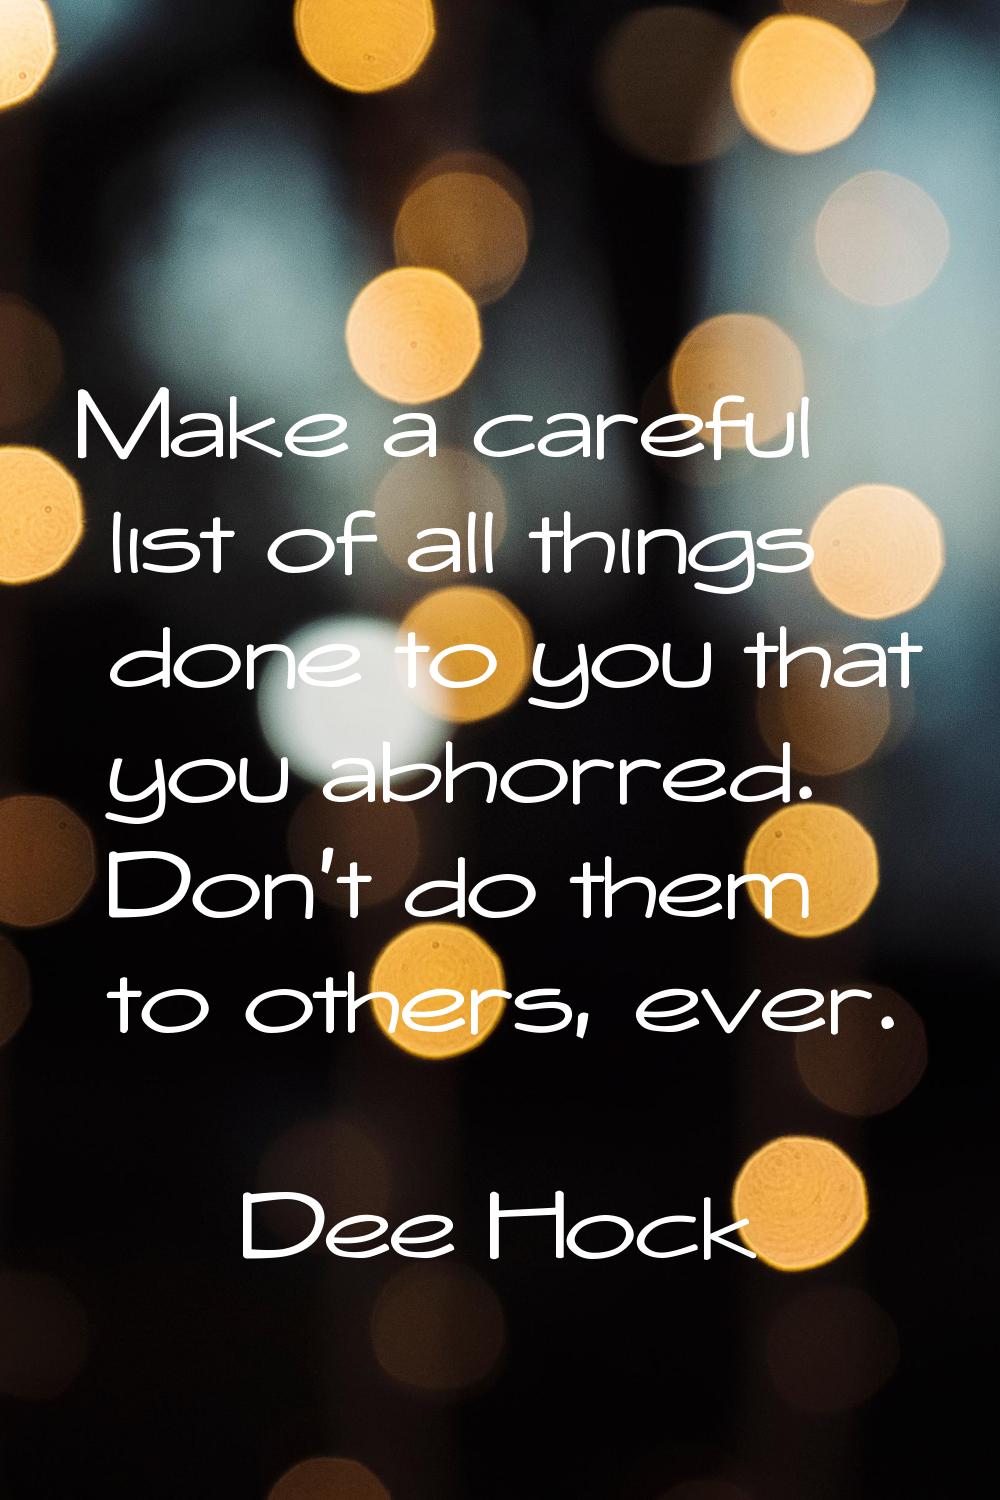 Make a careful list of all things done to you that you abhorred. Don't do them to others, ever.